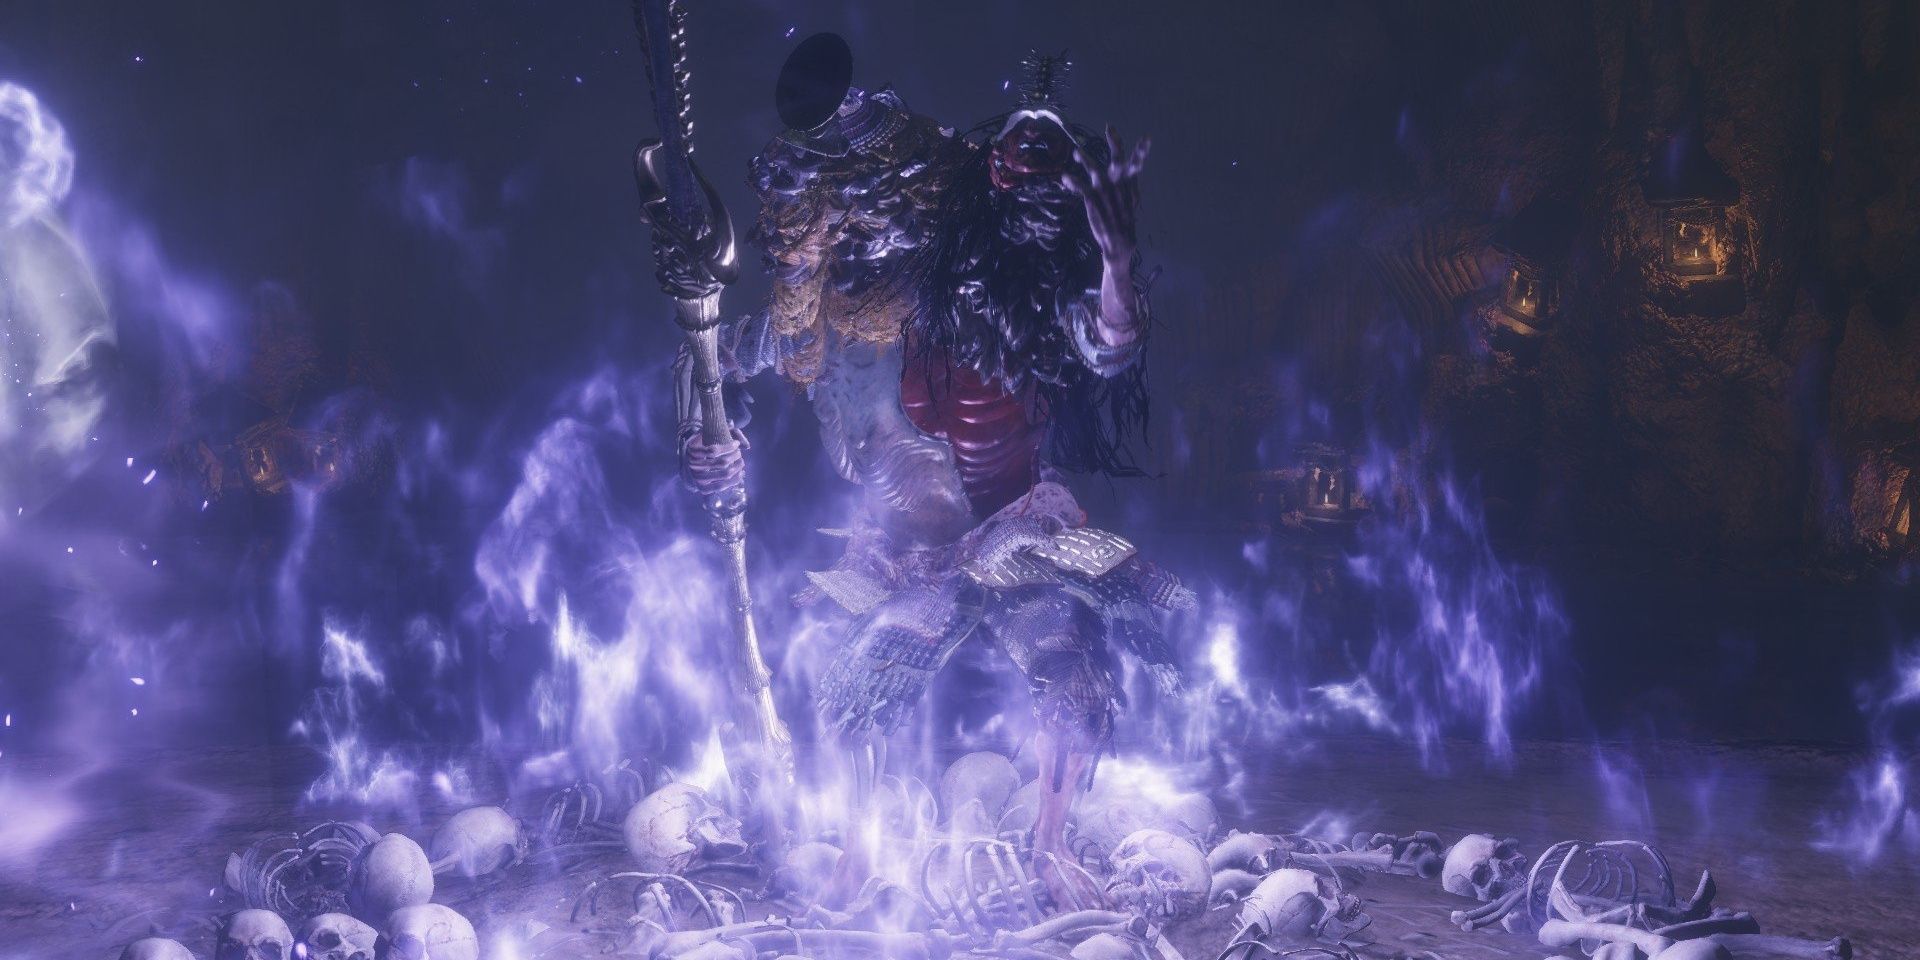 A Shichimen Warrior surrounded by skulls and bones with purple flames around them